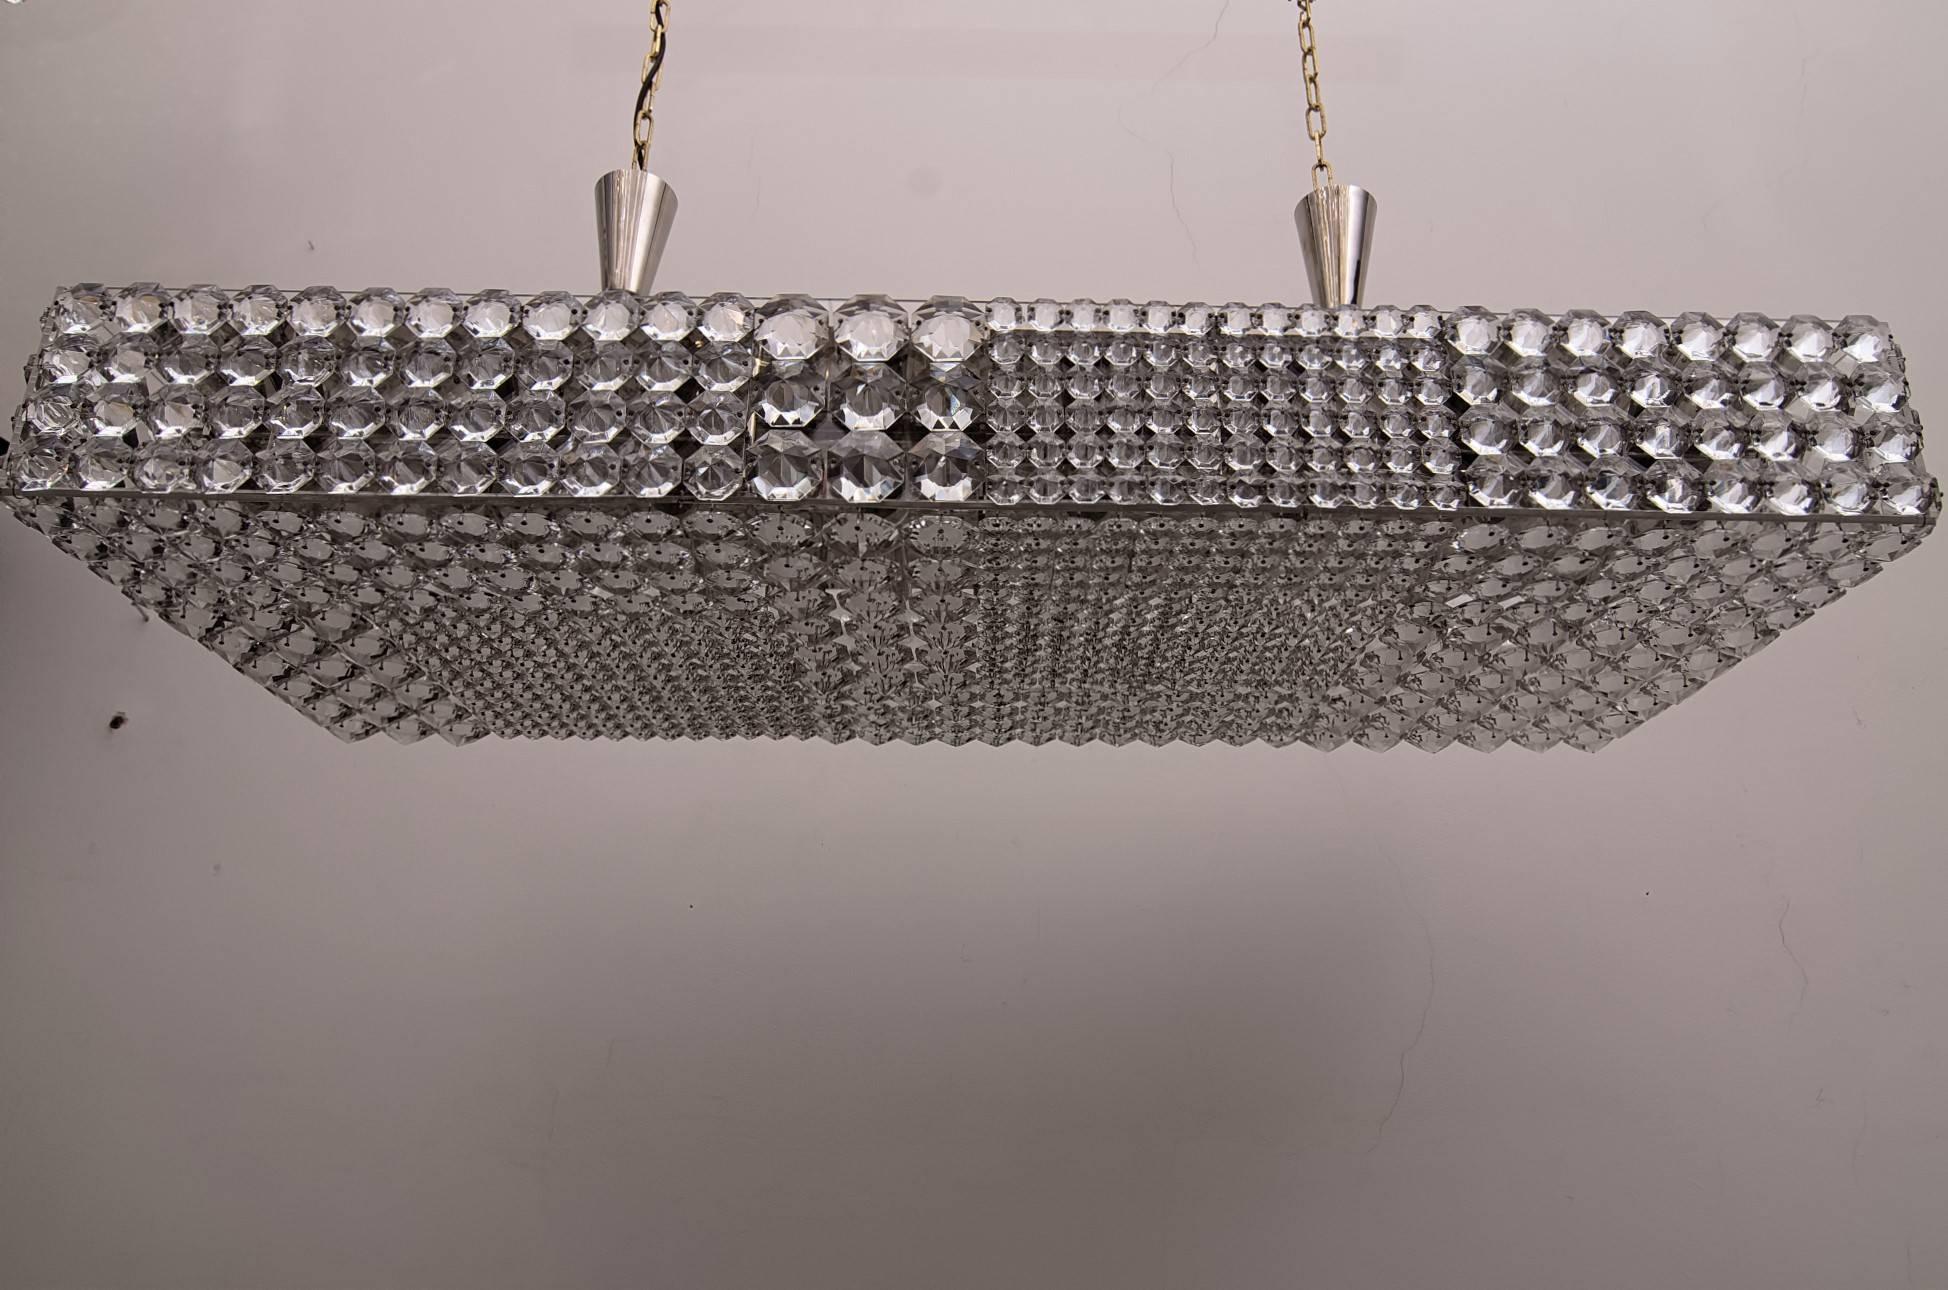 An amazing and rare rectangular crystal chandelier by E. Bakalowits & Söhne, 1960s
Excellent original condition
16 bulbs make an amazing light
Both sides can be pulled out for bulb changing.